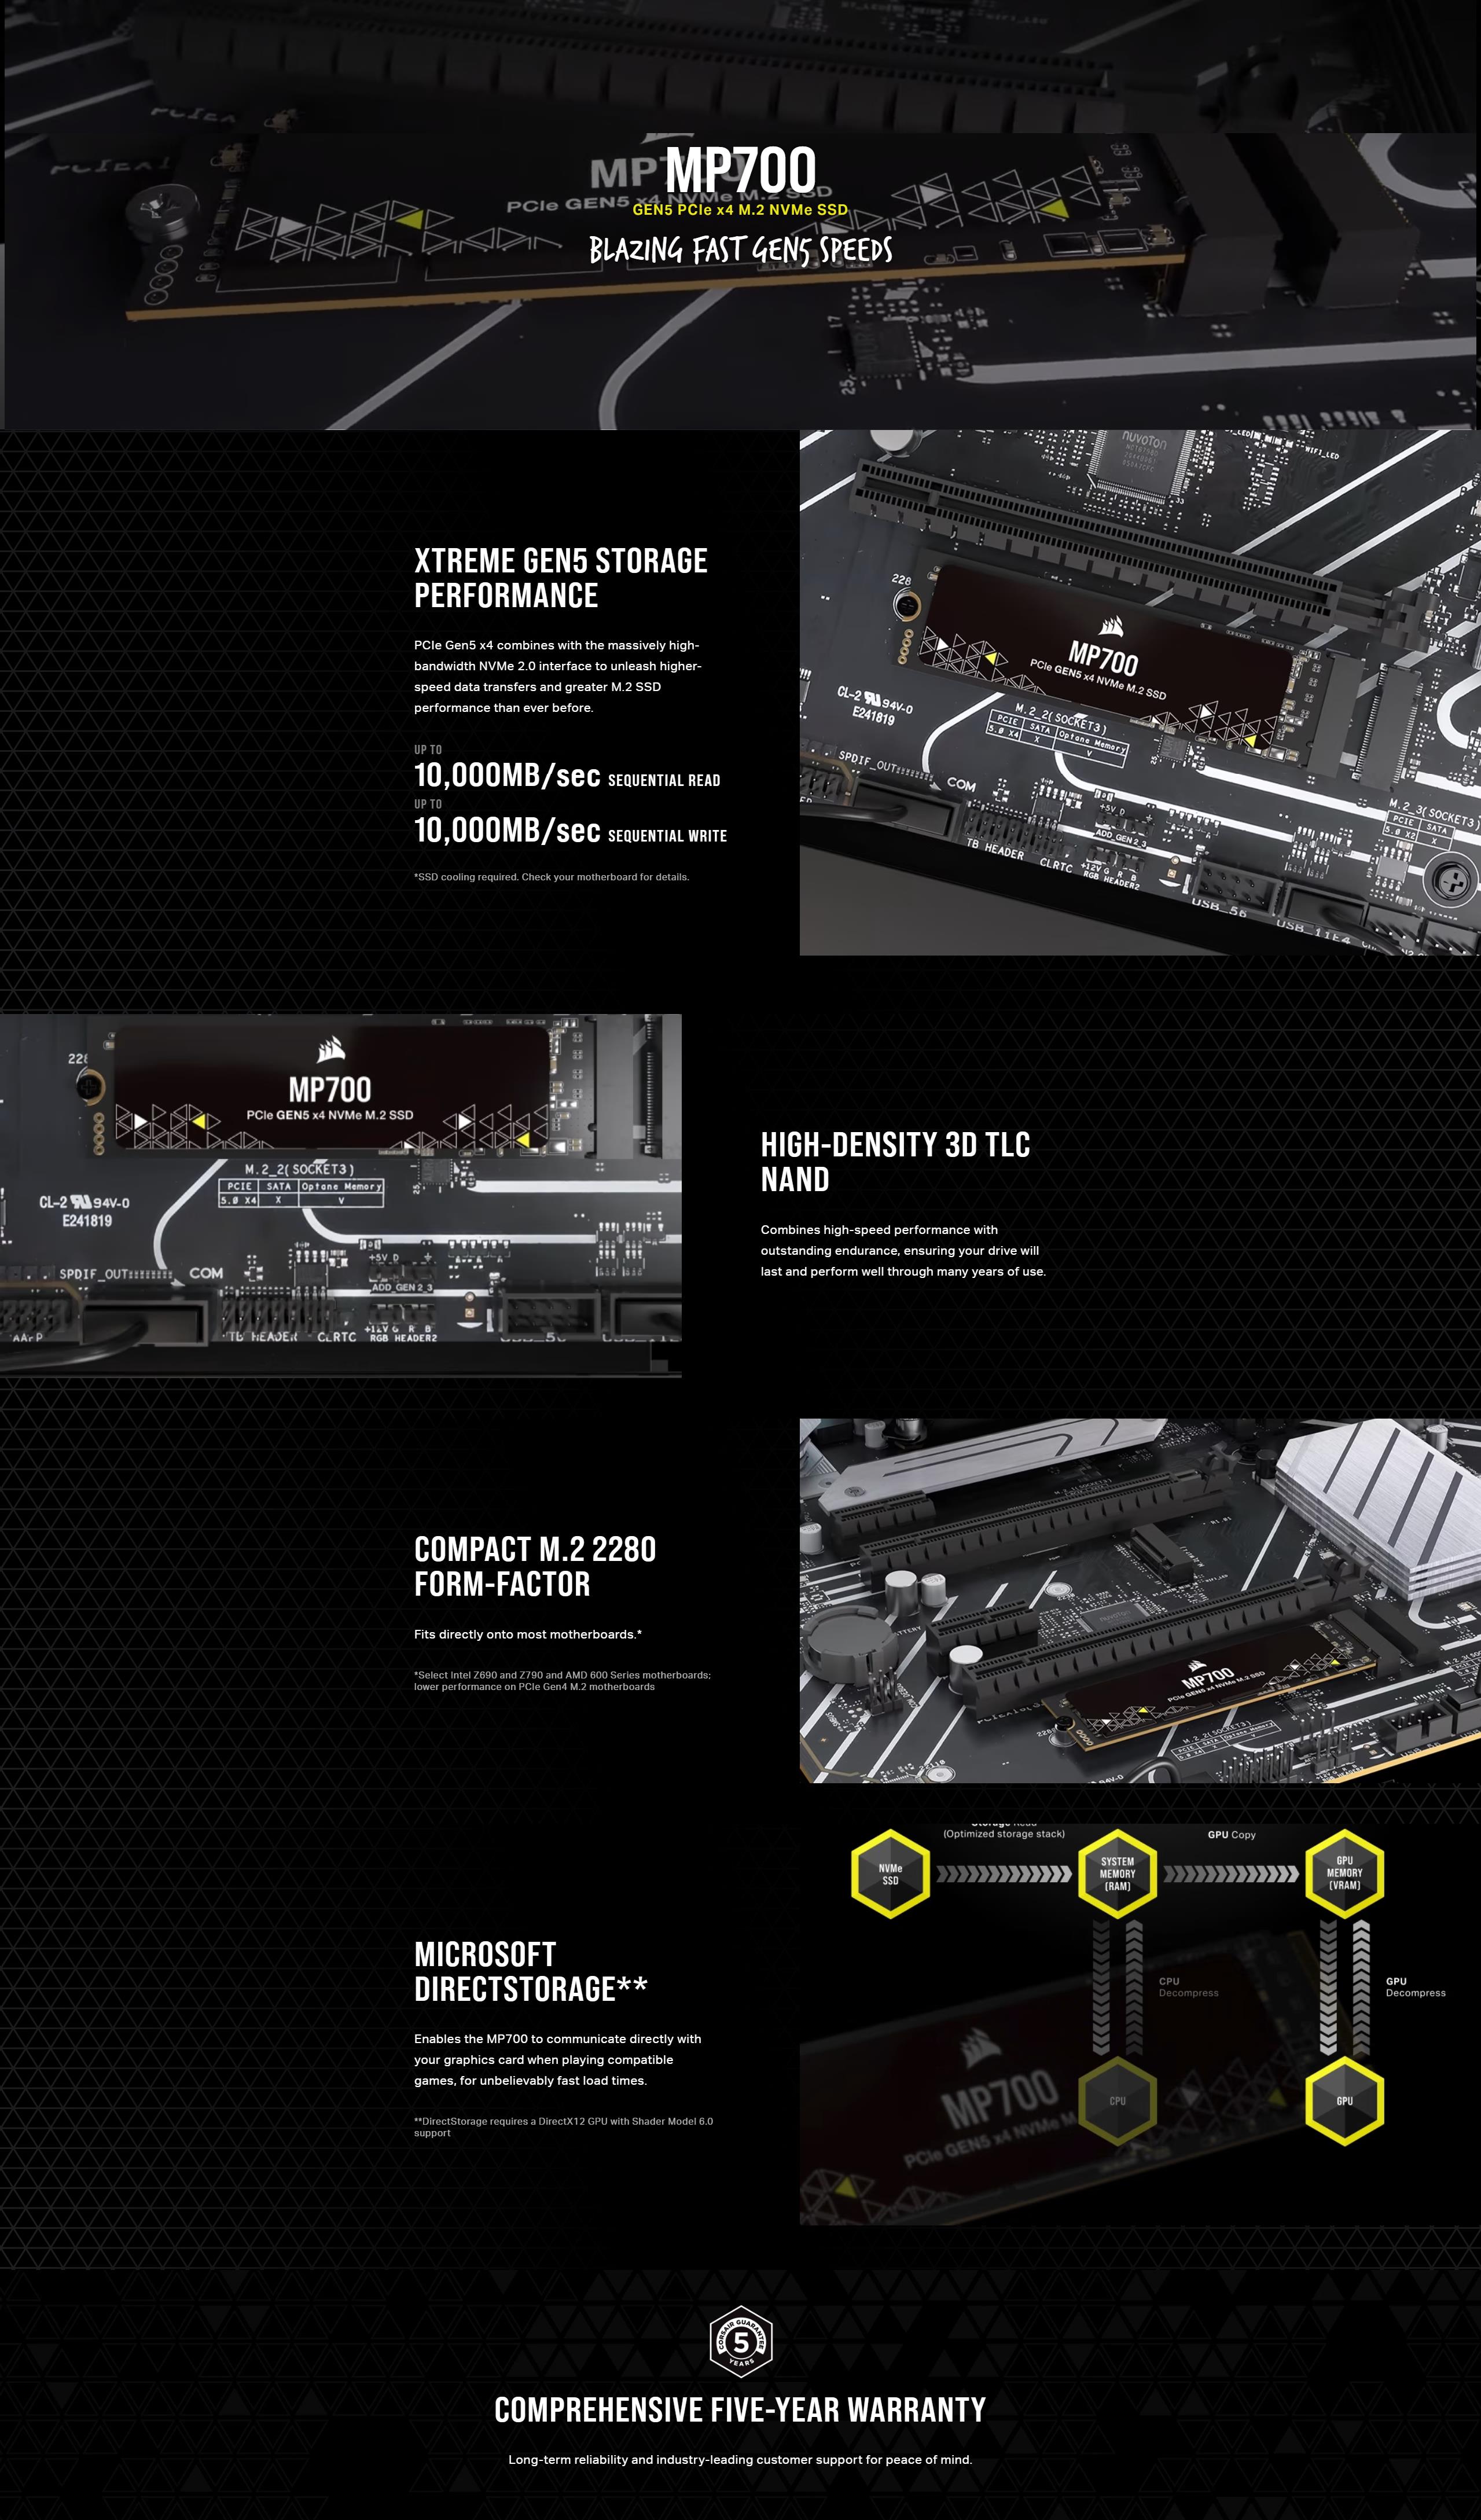 A large marketing image providing additional information about the product Corsair MP700 PCIe Gen5 NVMe M.2 SSD - 1TB - Additional alt info not provided